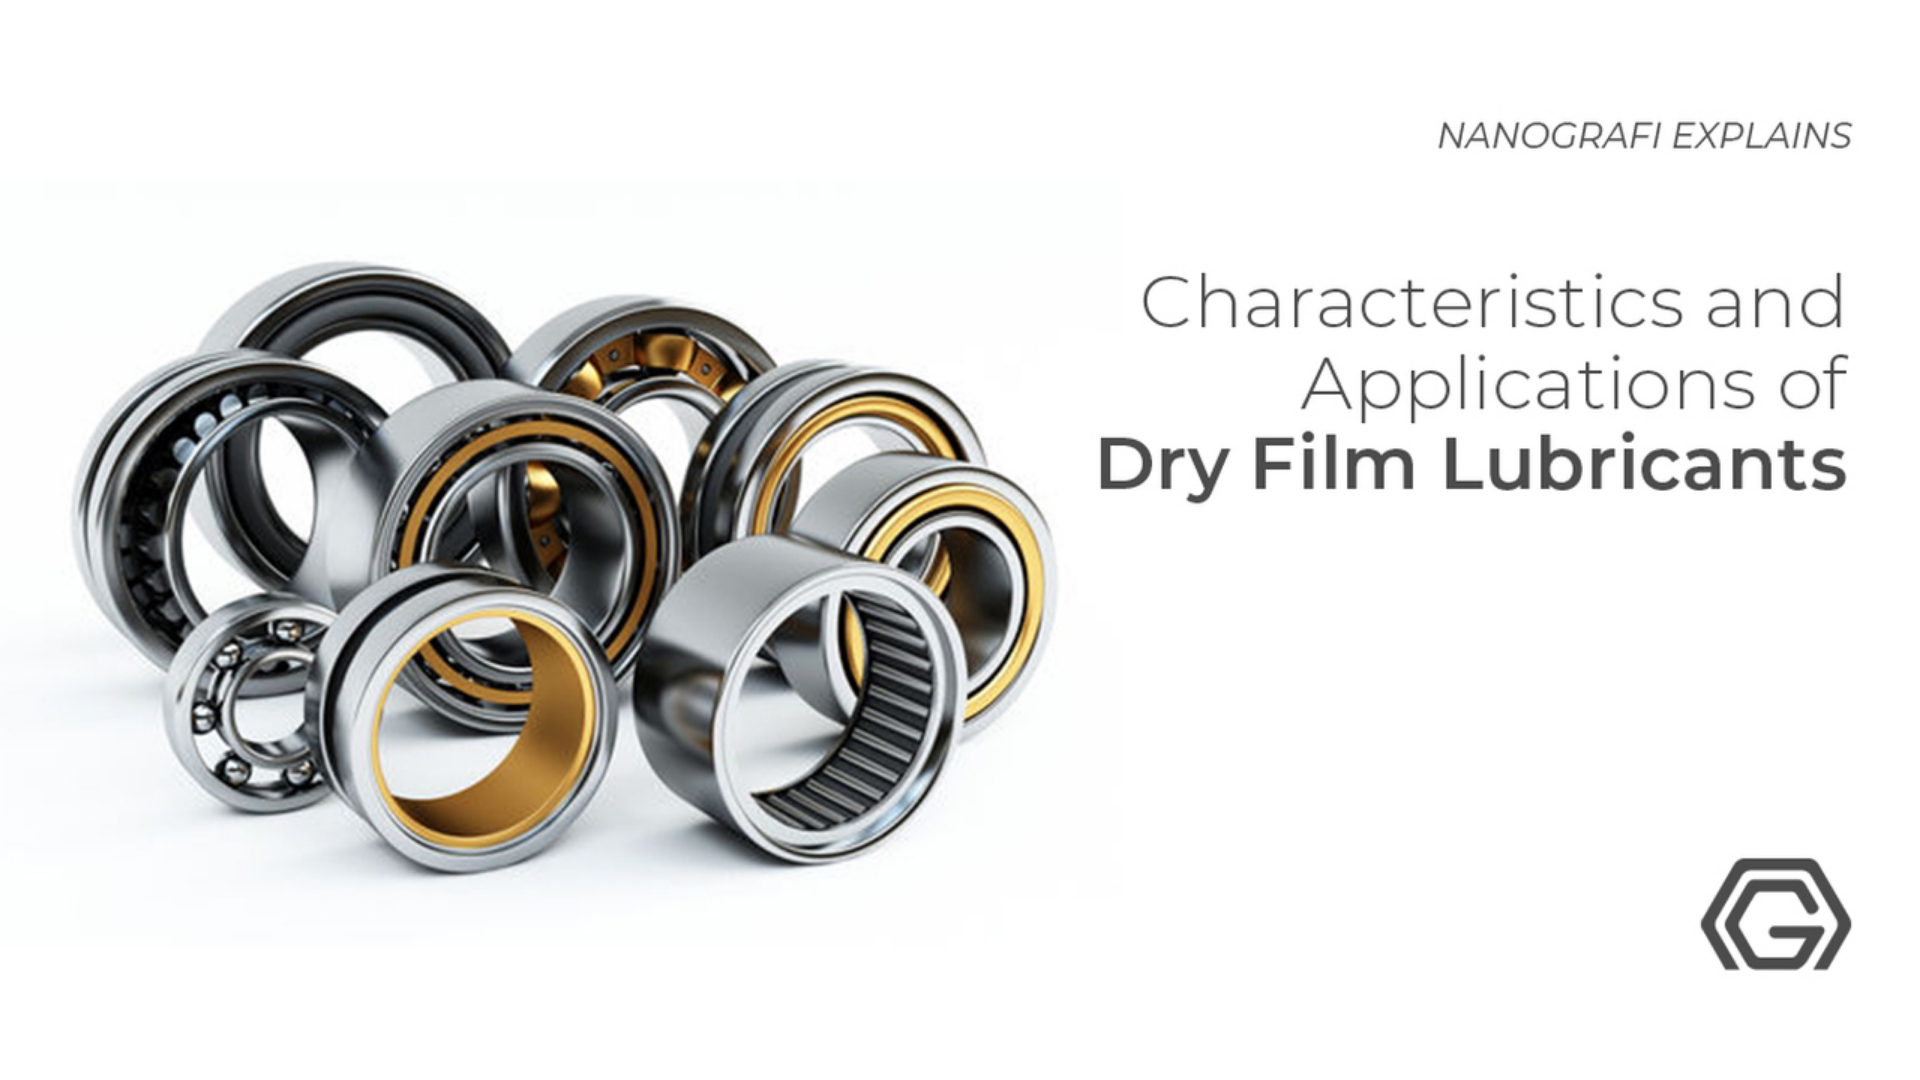 Characteristics and applications of dry film lubricants